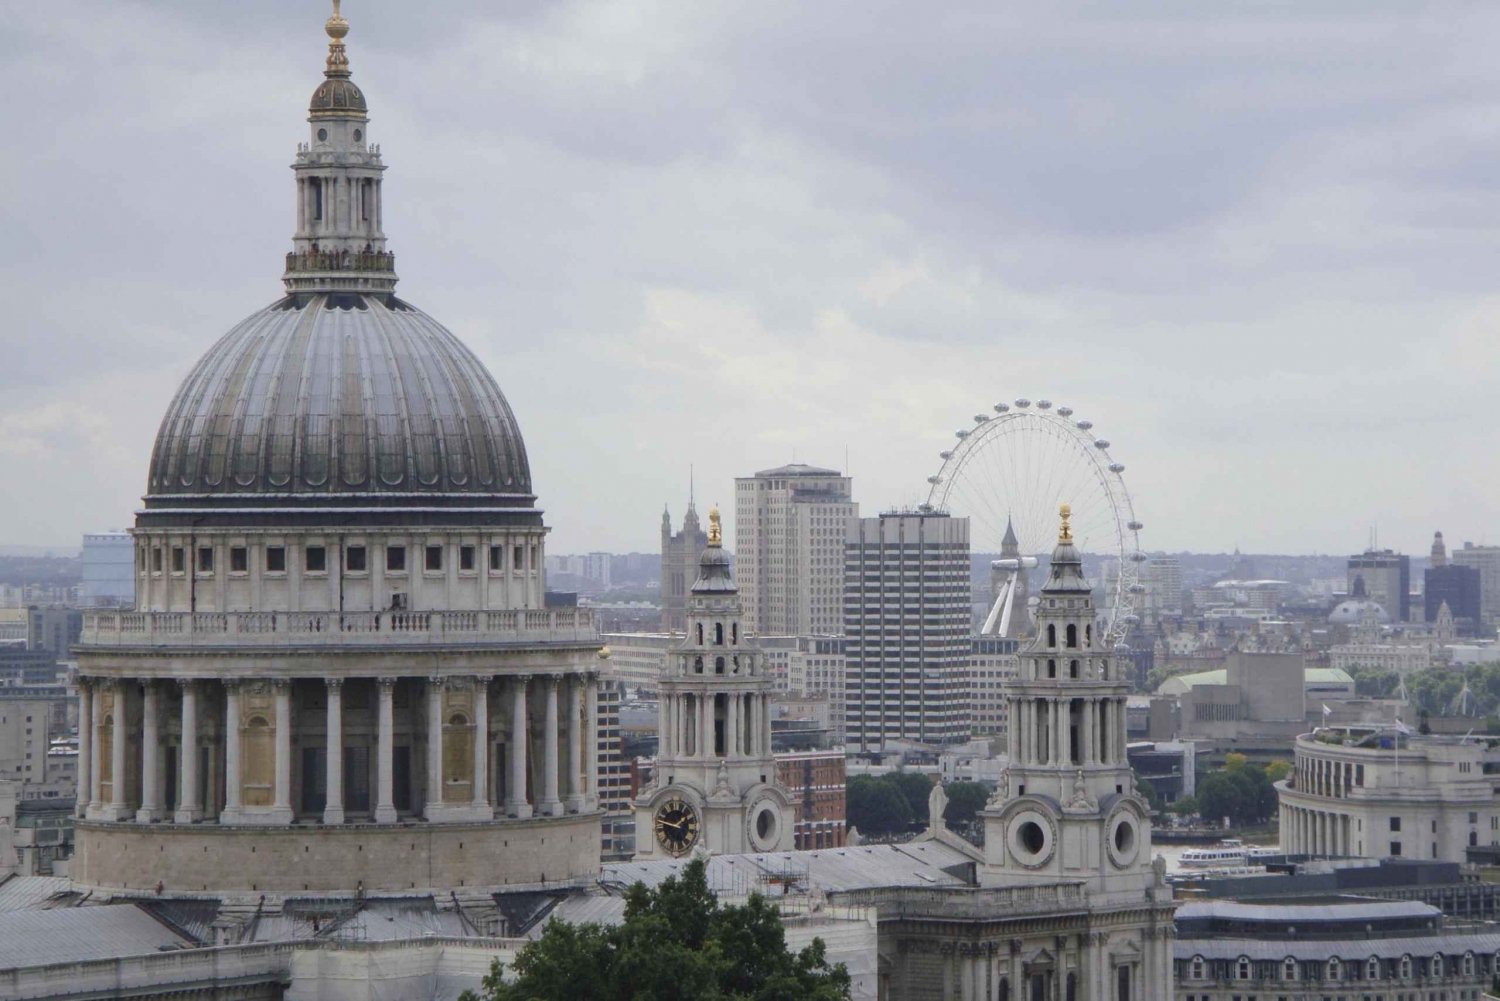 London: Top 30 Sights Walking Tour & St Pauls Cathedral